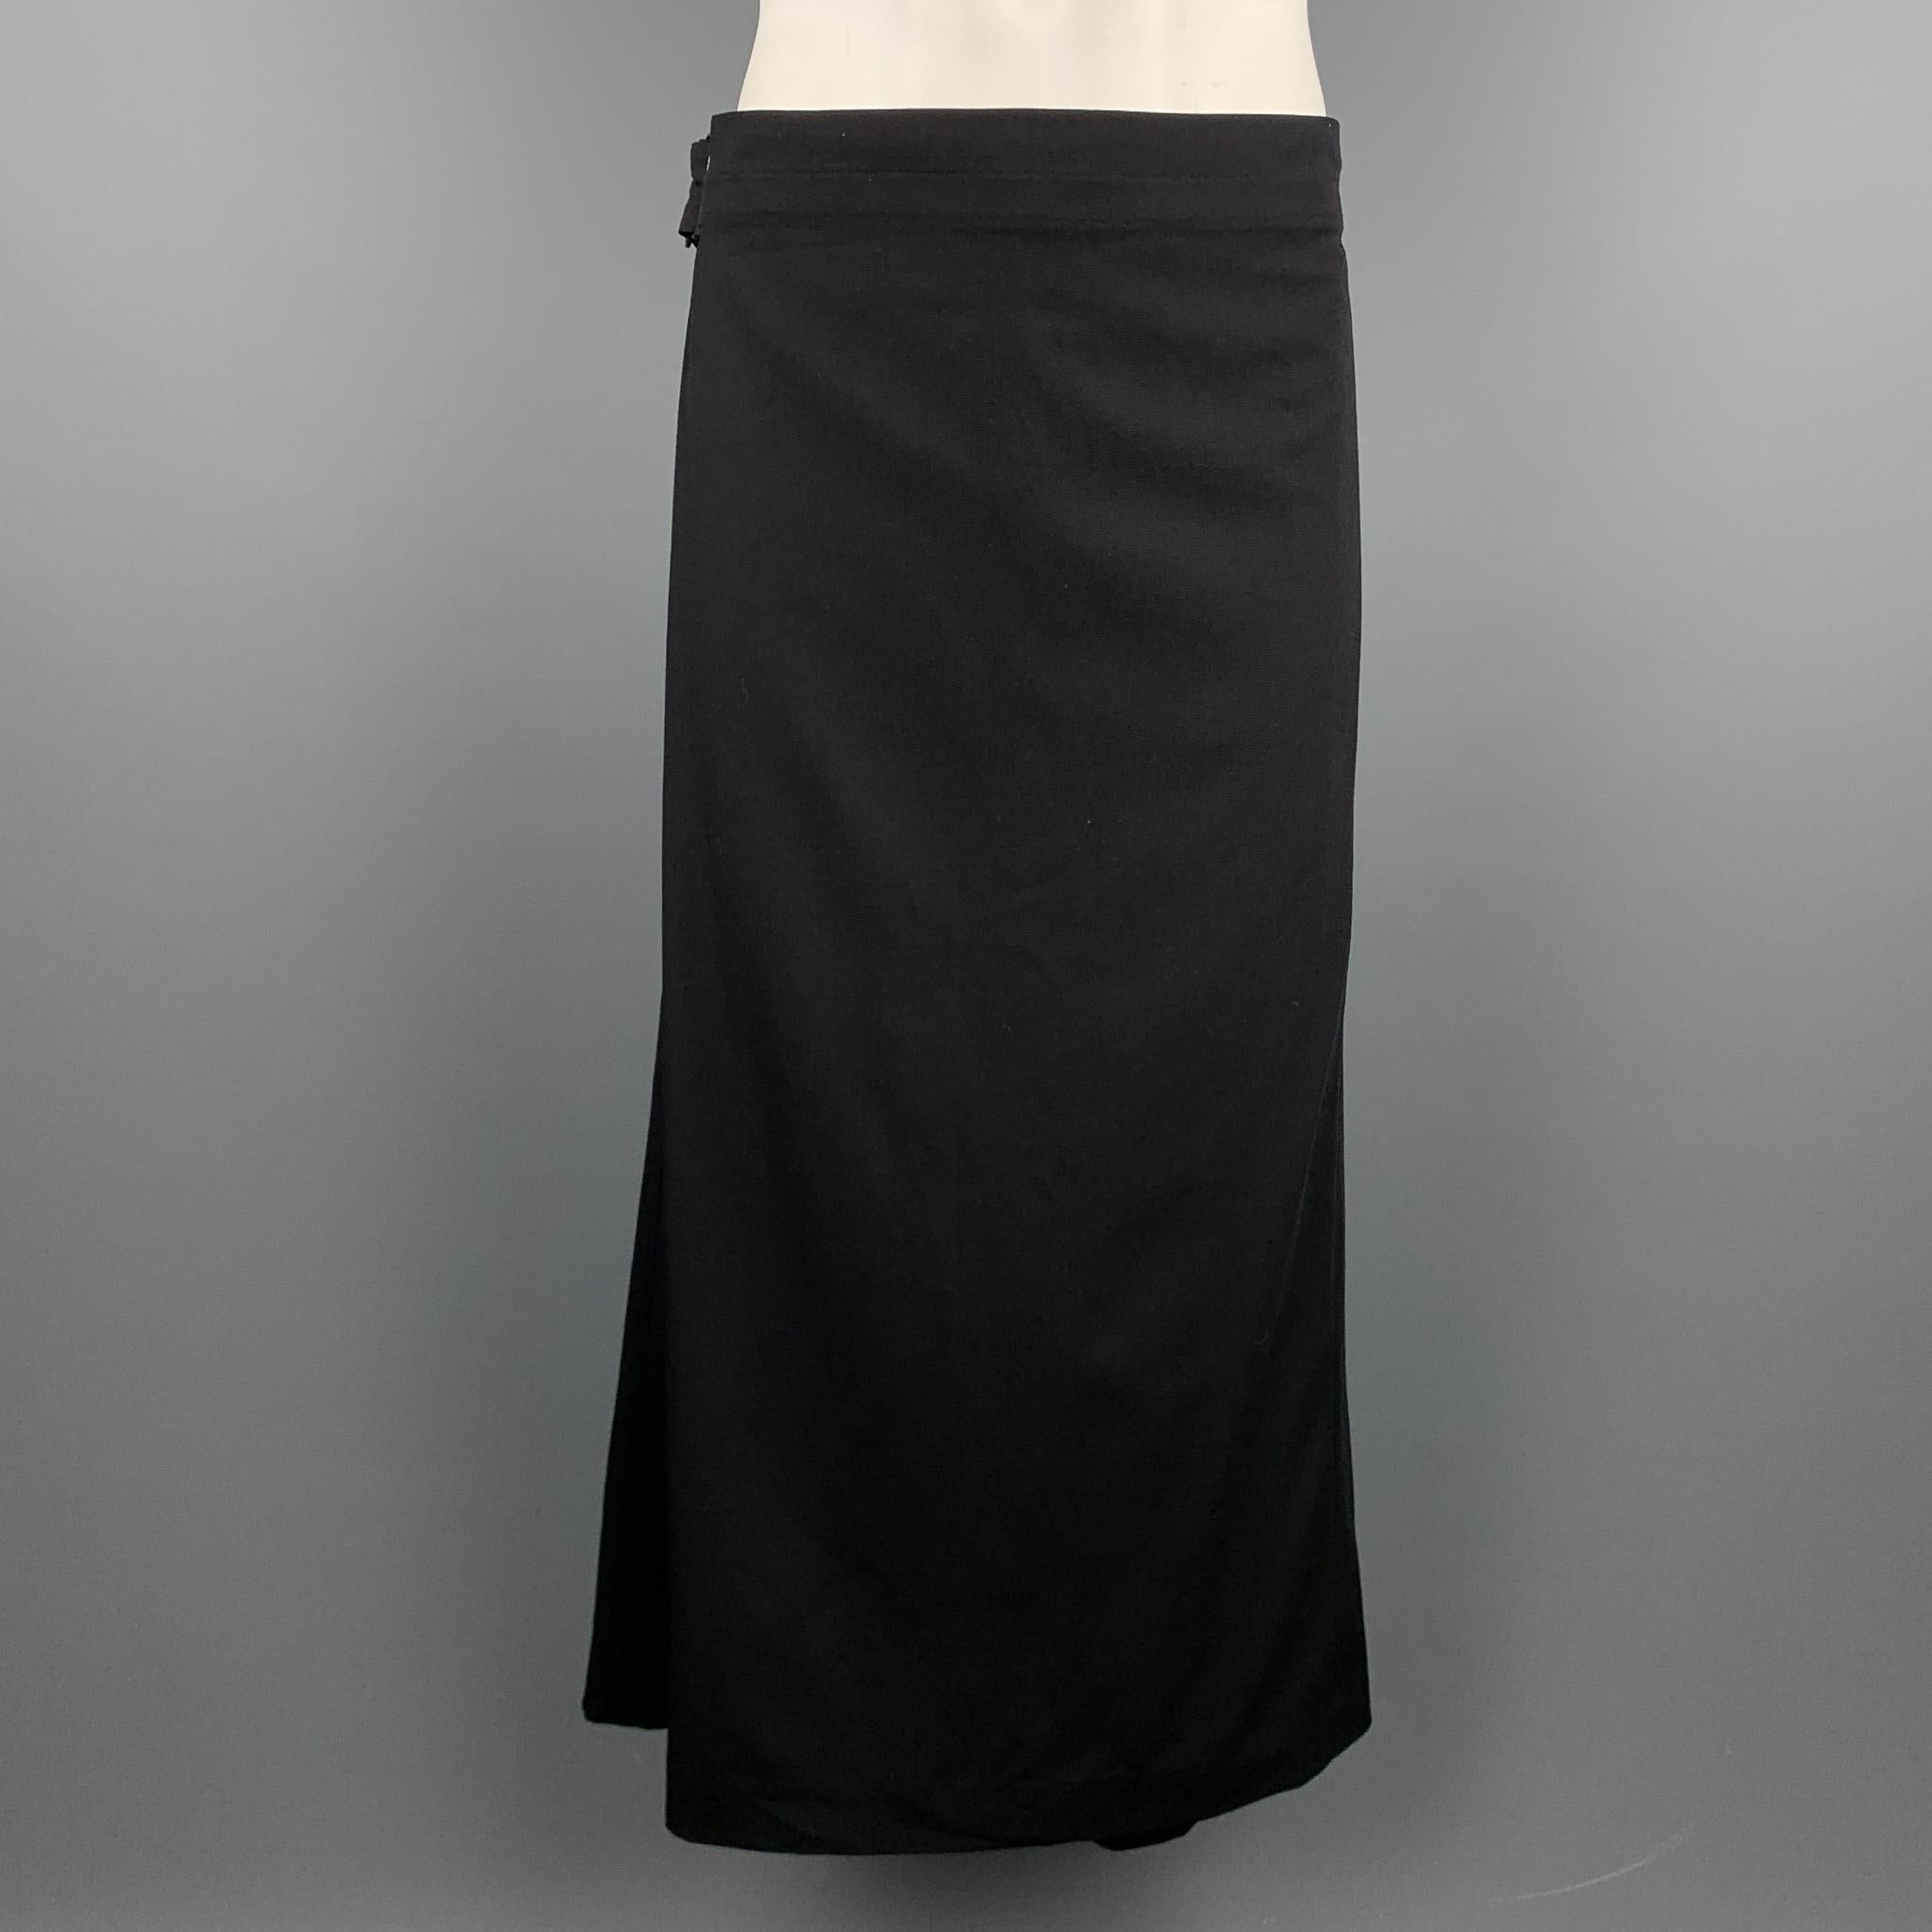 Vintage JEAN PAUL GAULTIER dress pants comes in a black wool featuring a back apron design, mid rise, waistband with belt loops, strap closure, side pockets, wide leg, back rear pleat, and a zip fly closure. Made in Italy.

Very Good Pre-Owned